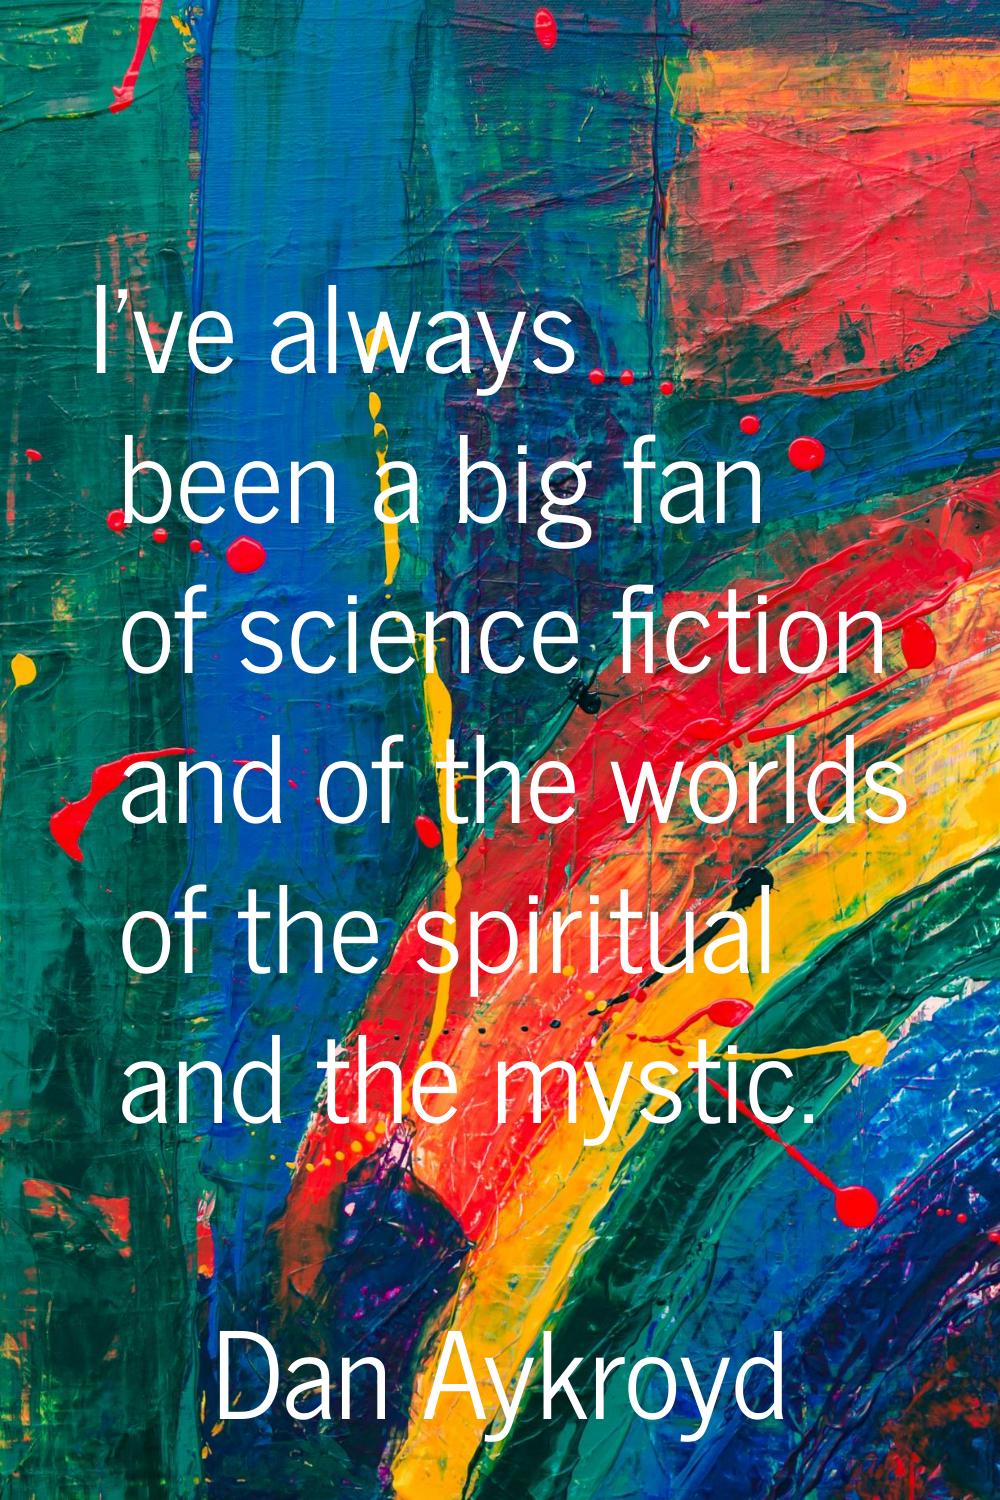 I've always been a big fan of science fiction and of the worlds of the spiritual and the mystic.